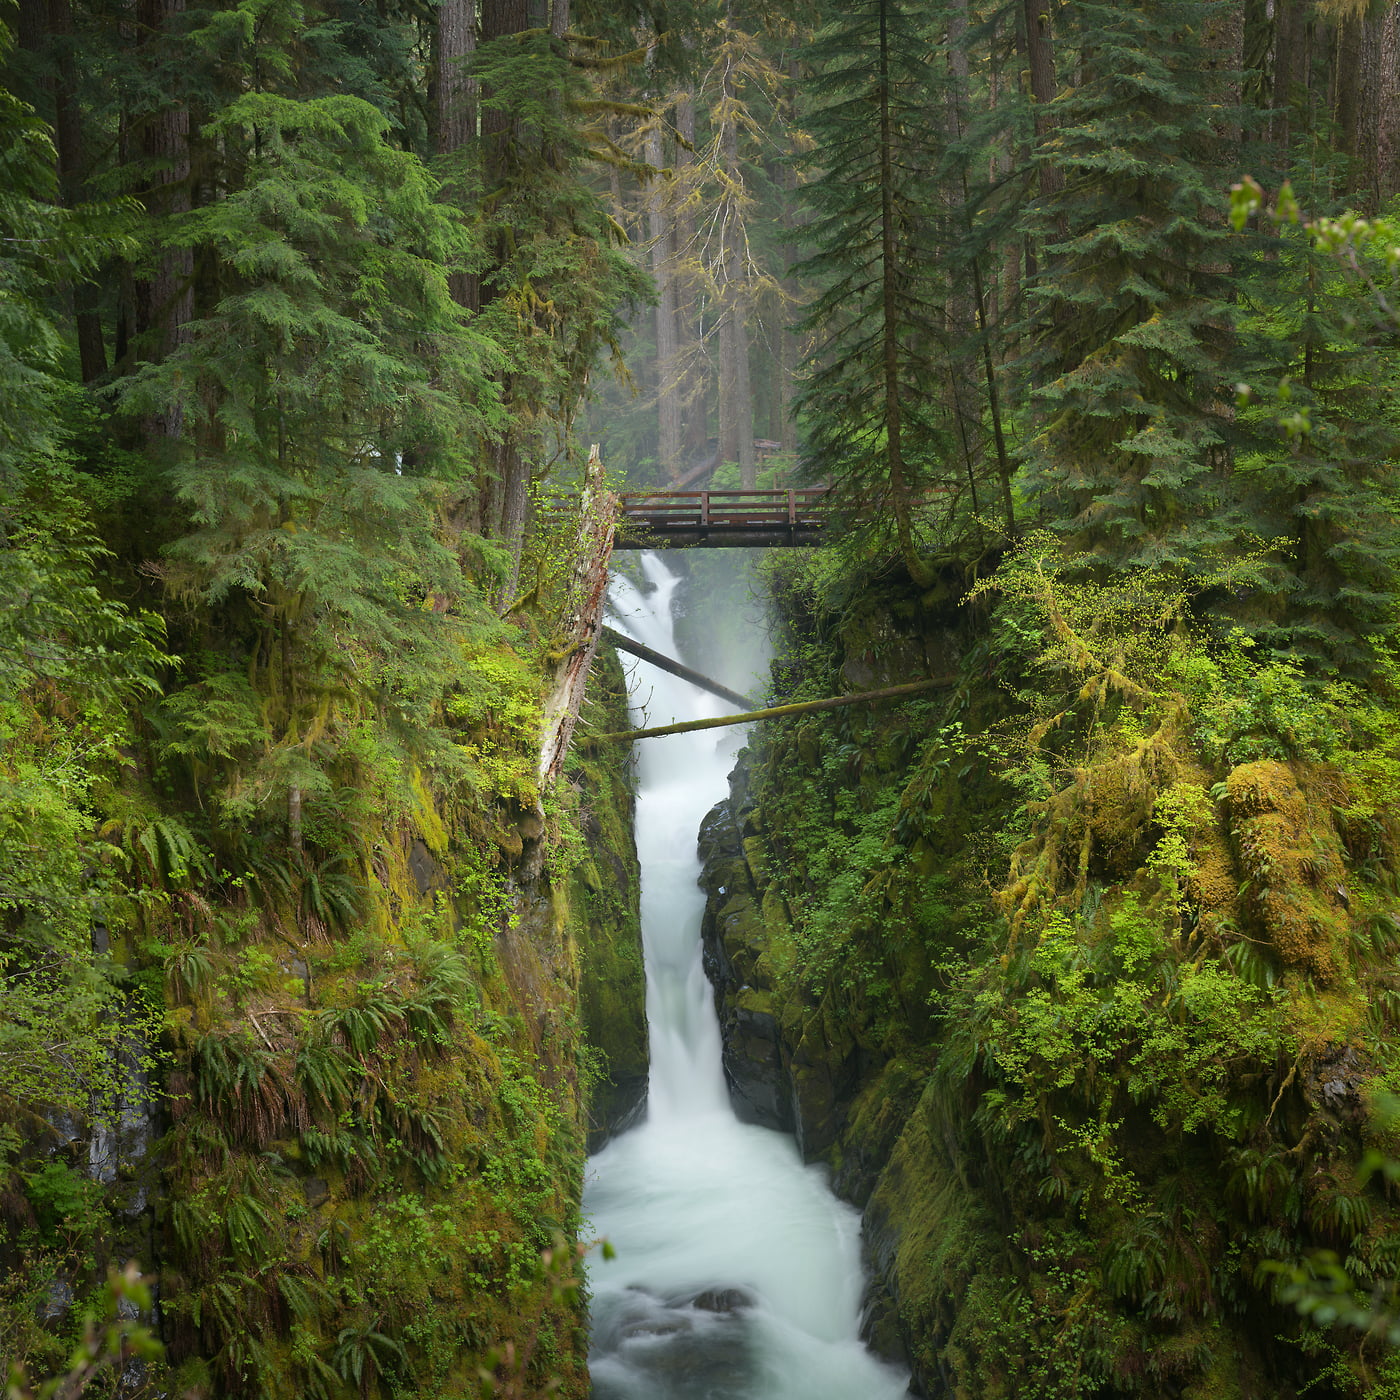 946 megapixels! A very high resolution, large-format VAST photo print of a waterfall in a green forest; nature photograph created by Greg Probst in Sol Duc Falls, Olympic National Park